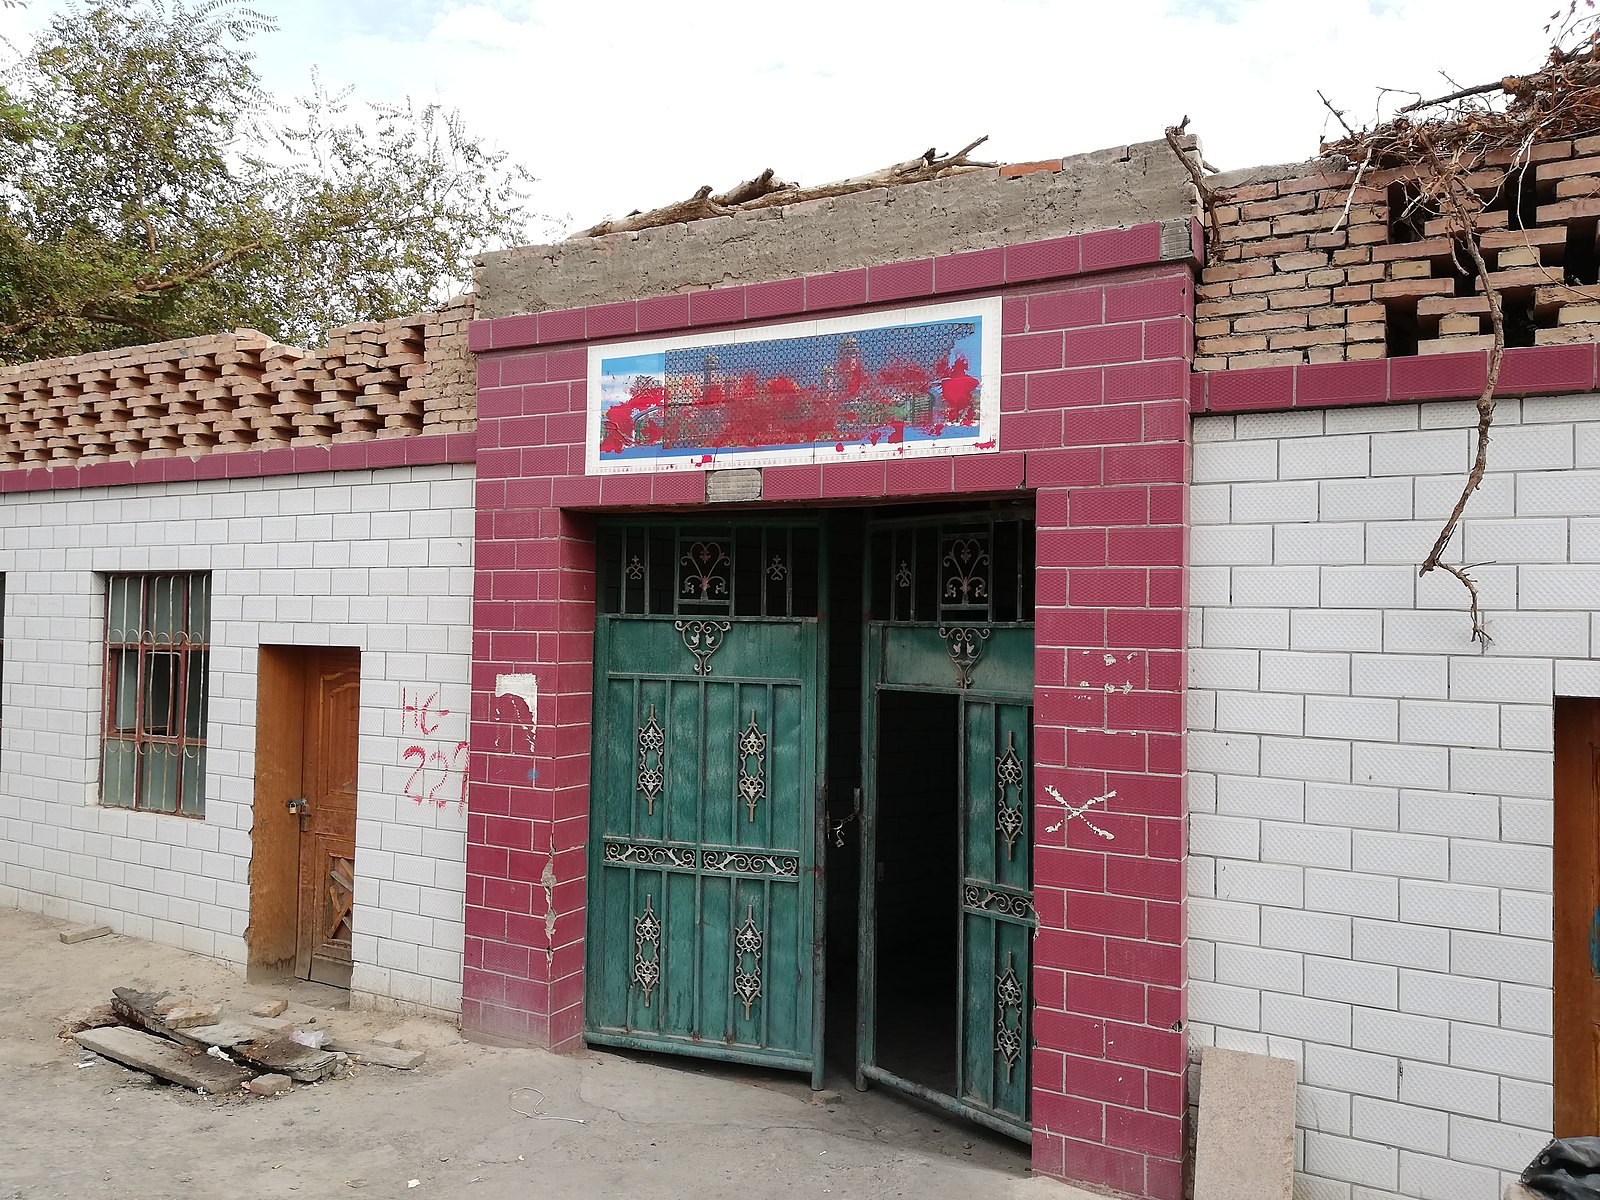 Household with painted-over images of mosques in Turban, a neighborhood in Eastern Xinjiang